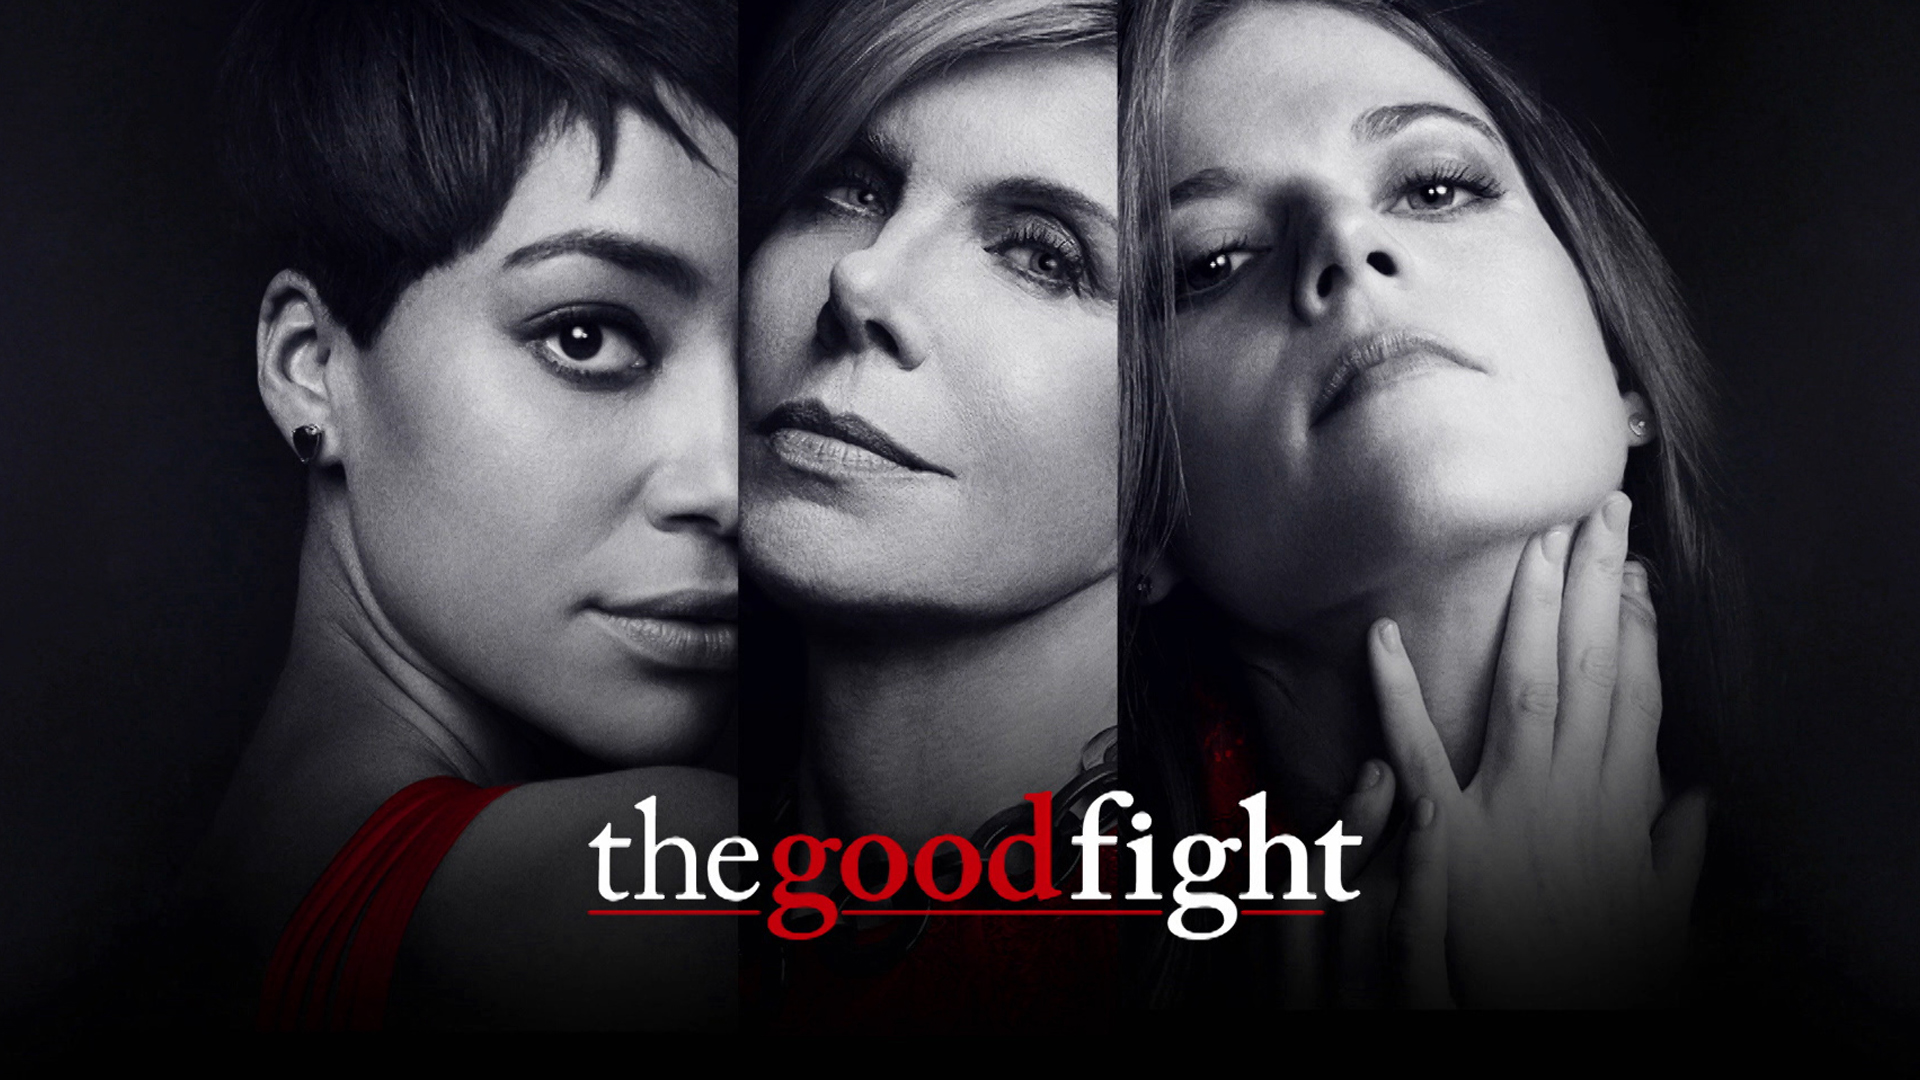 Title Sequence for "the good fight" on CBS